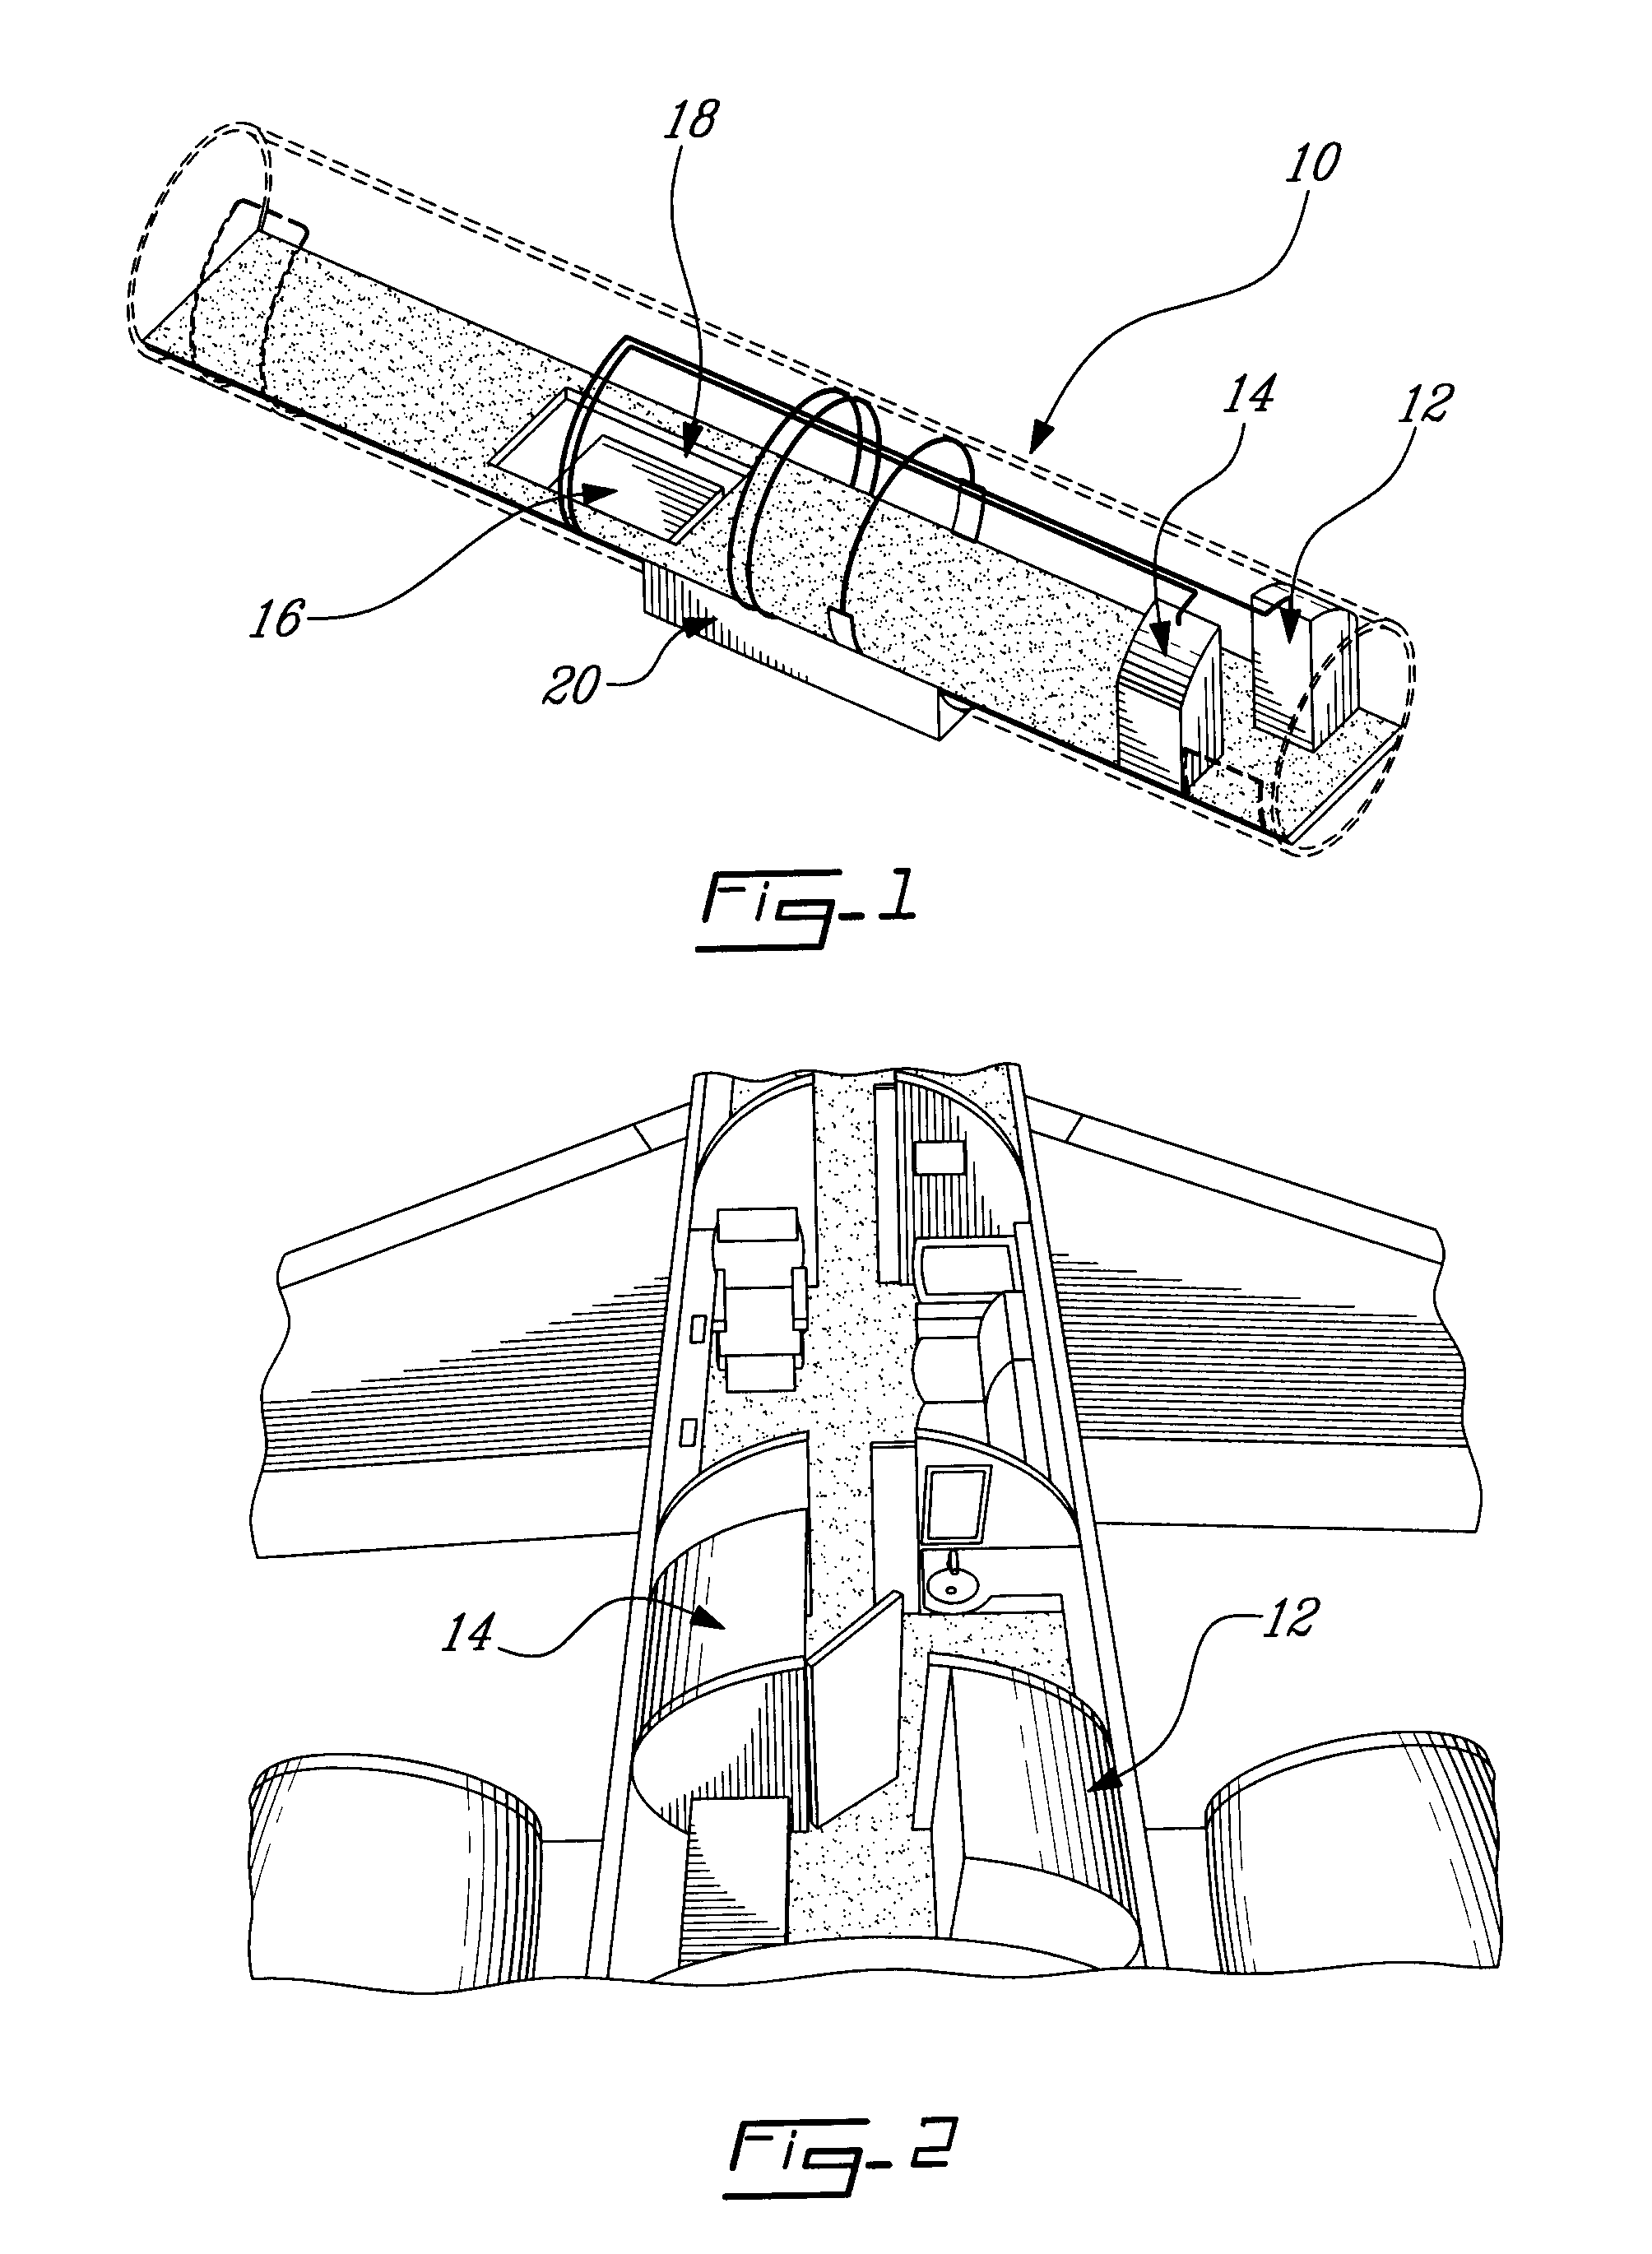 Auxiliary fuel tank system